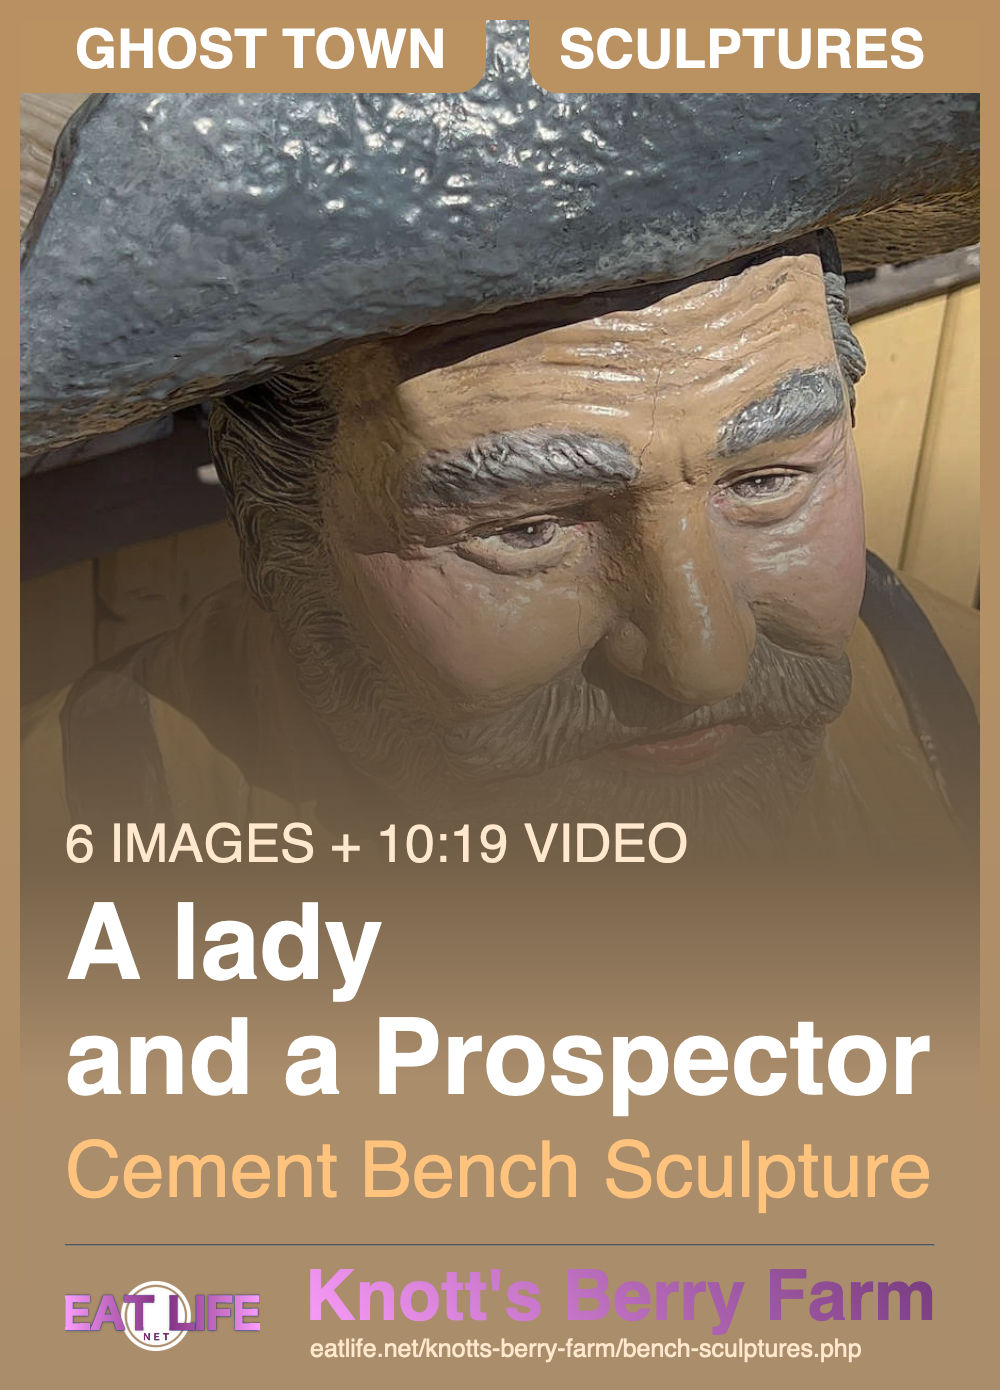 Lady and Prospector